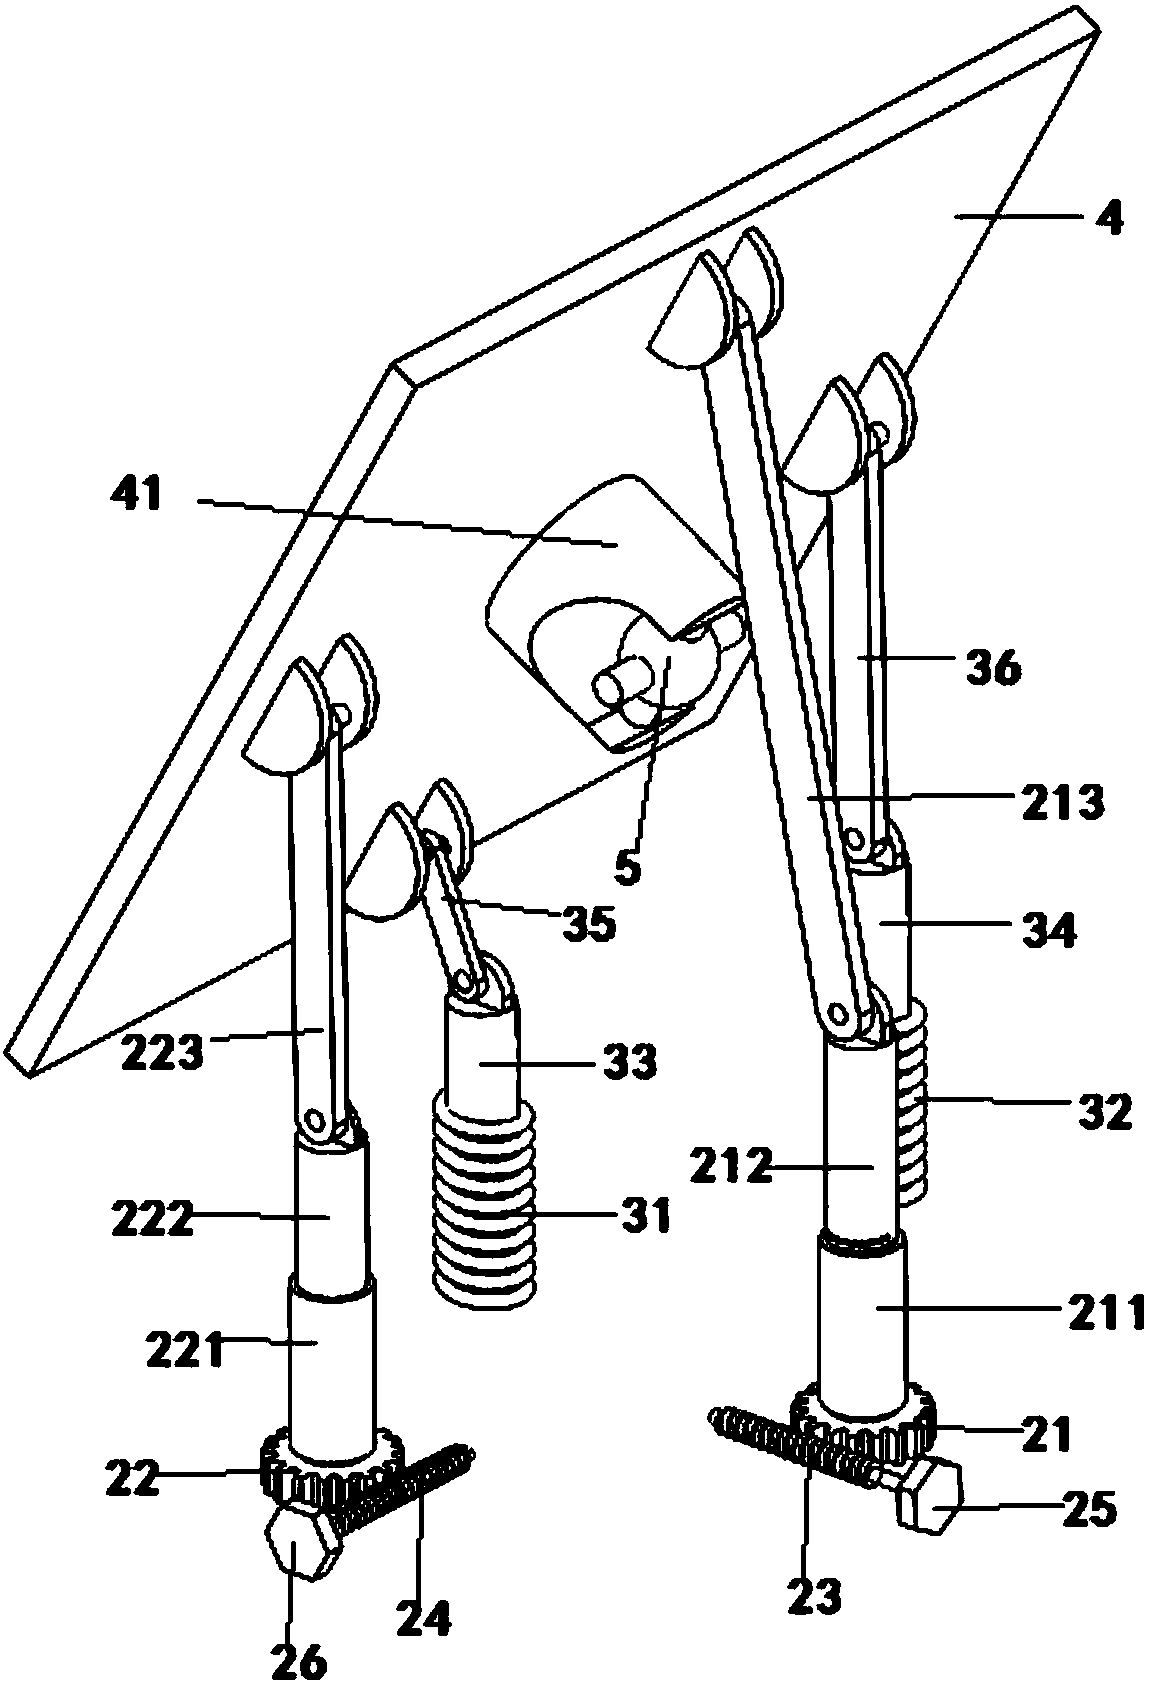 Fine angle adjustment device for solar photovoltaic panel